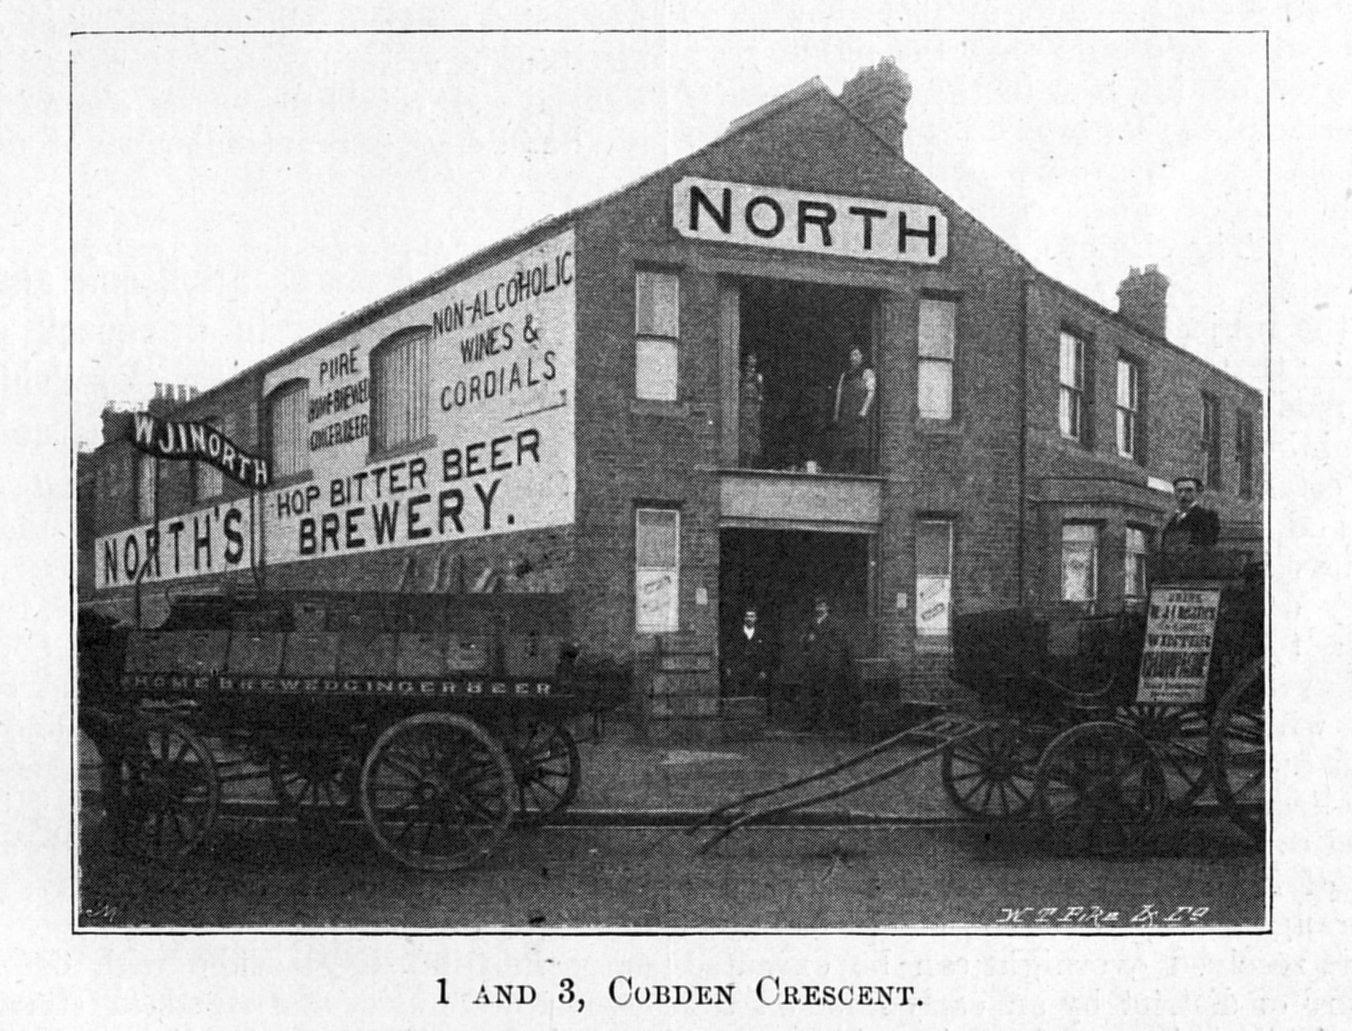 [Cobden Crescent Norths mineral water factory]